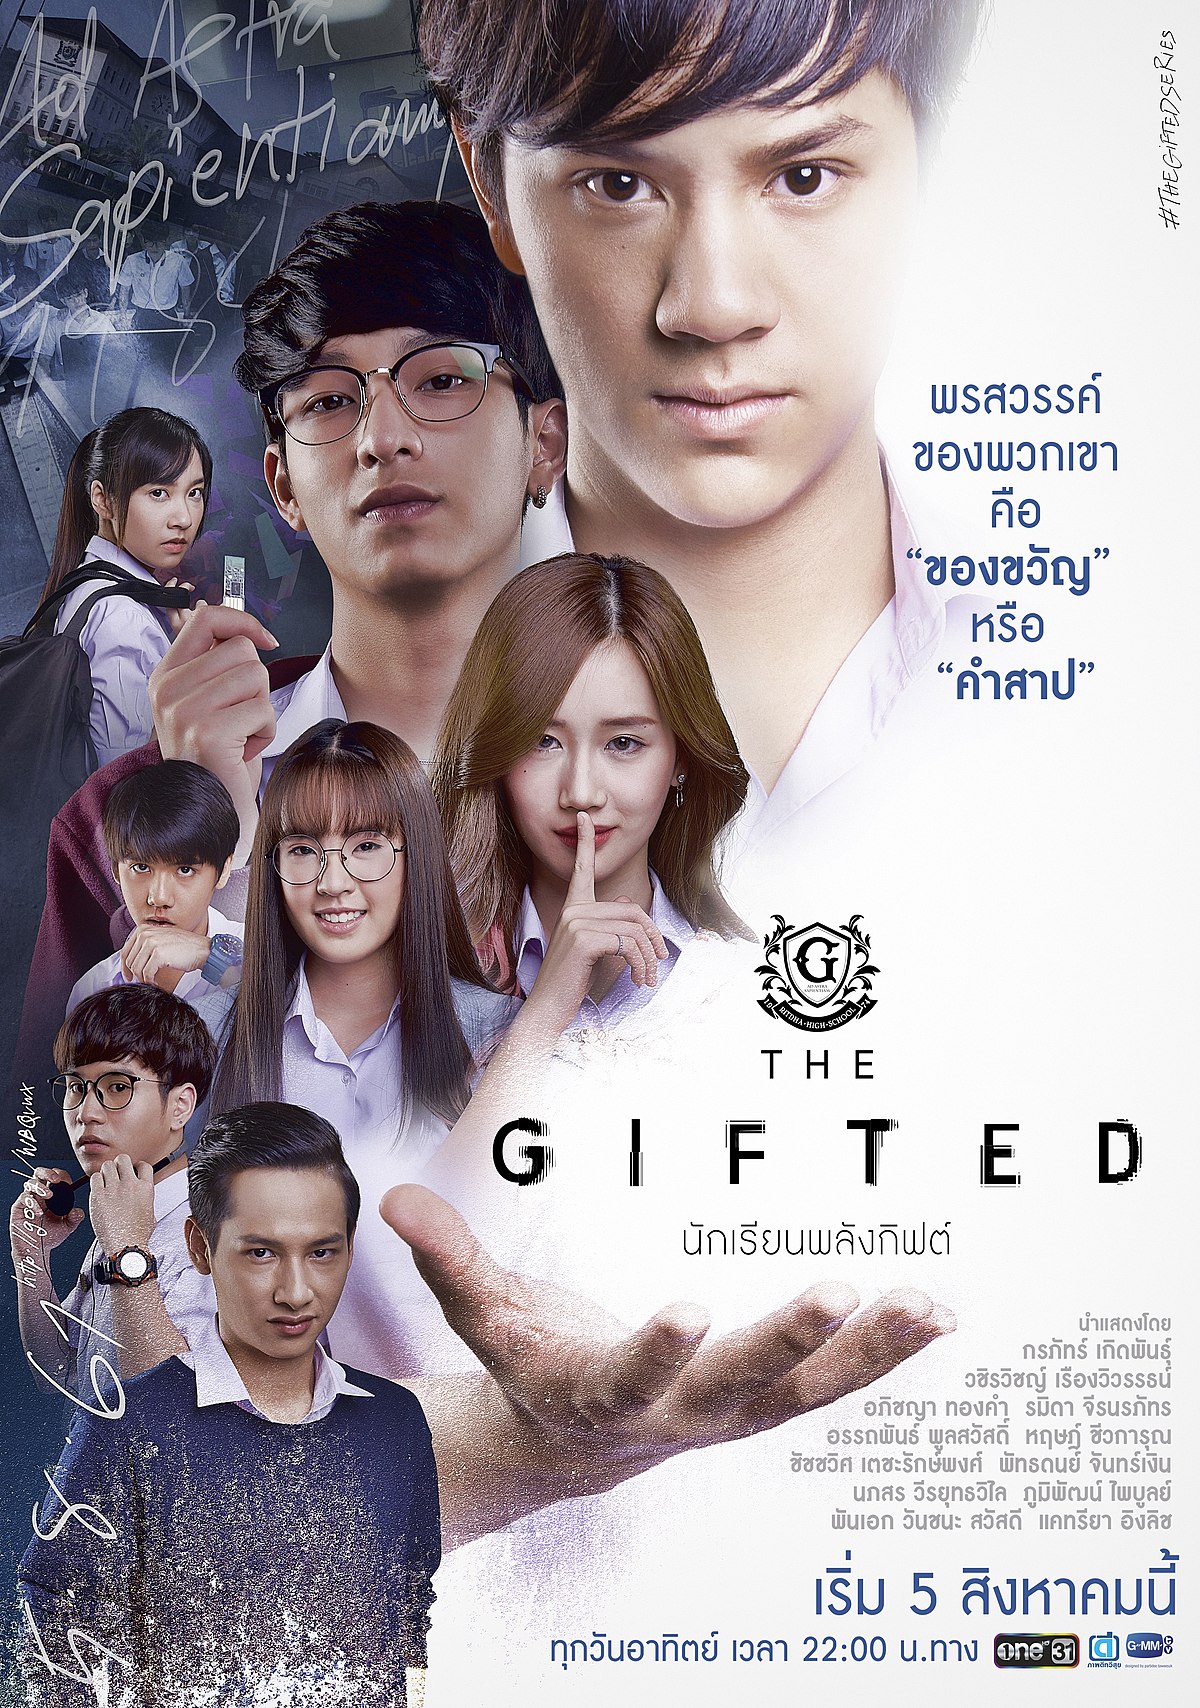 The Gifted Film Thailand Terbaik